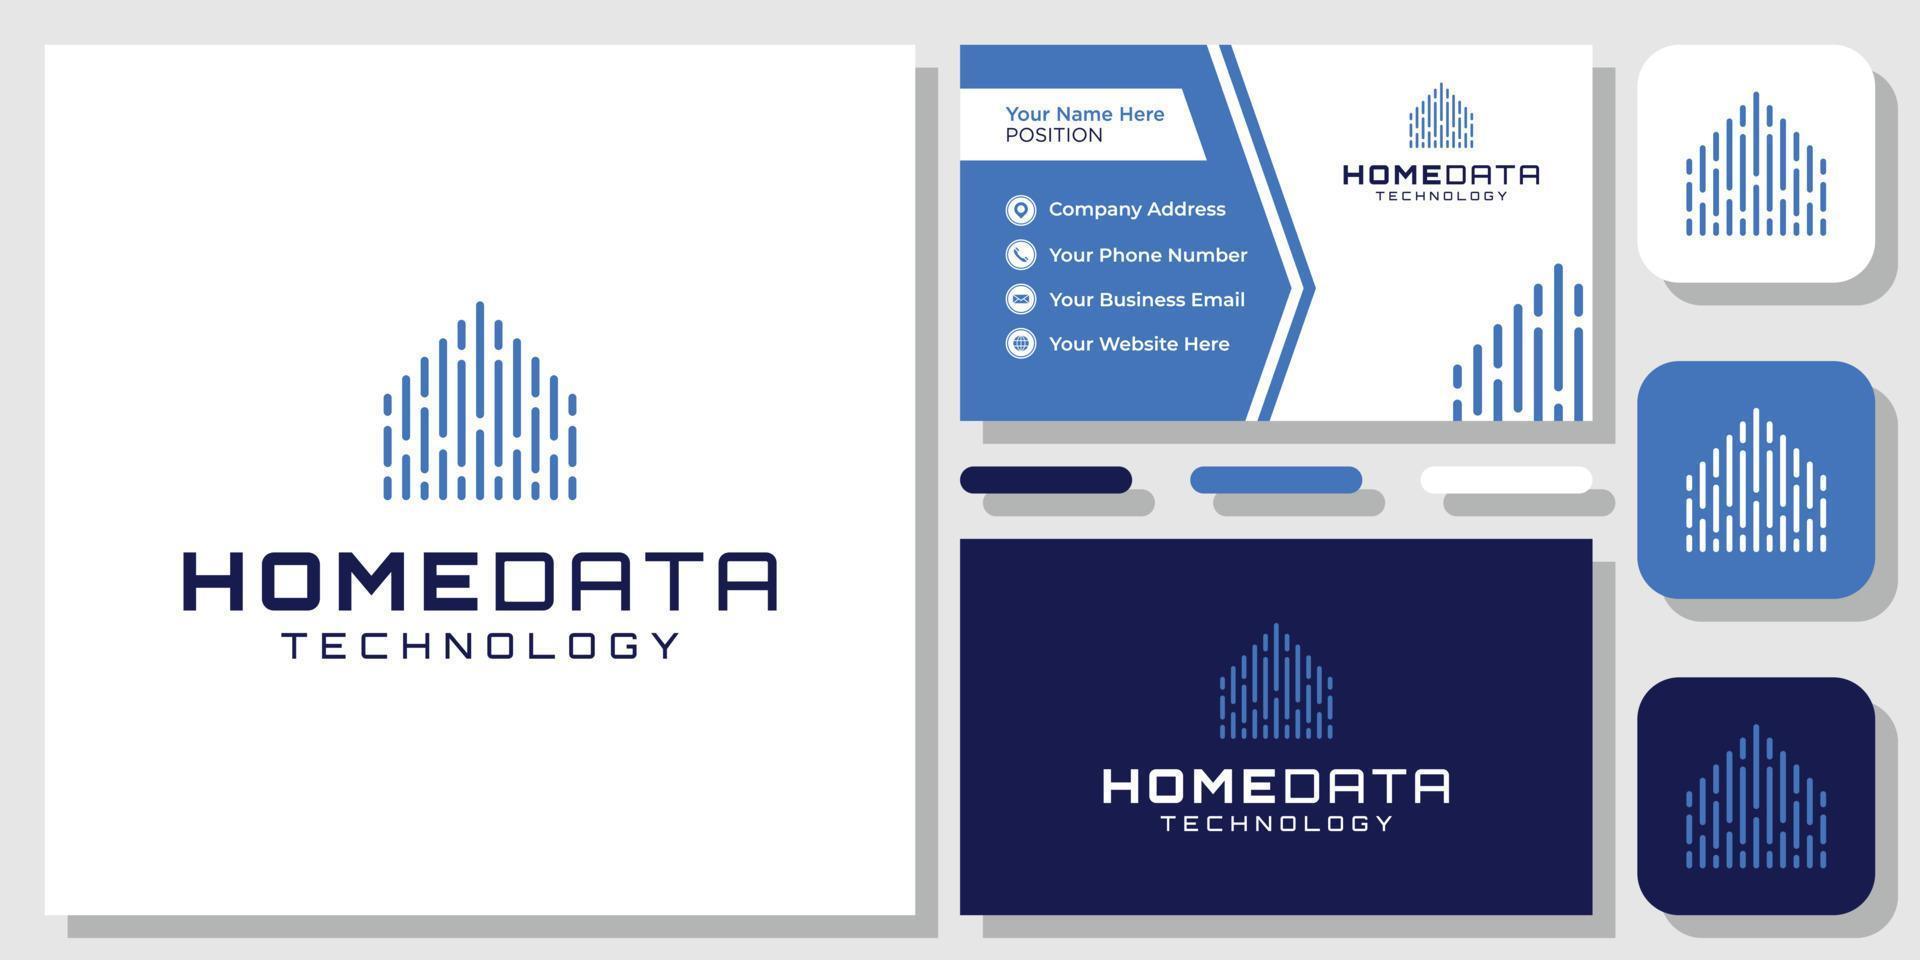 Home Data Technology Digital House Network Building Future Logo Design with Business Card Template vector